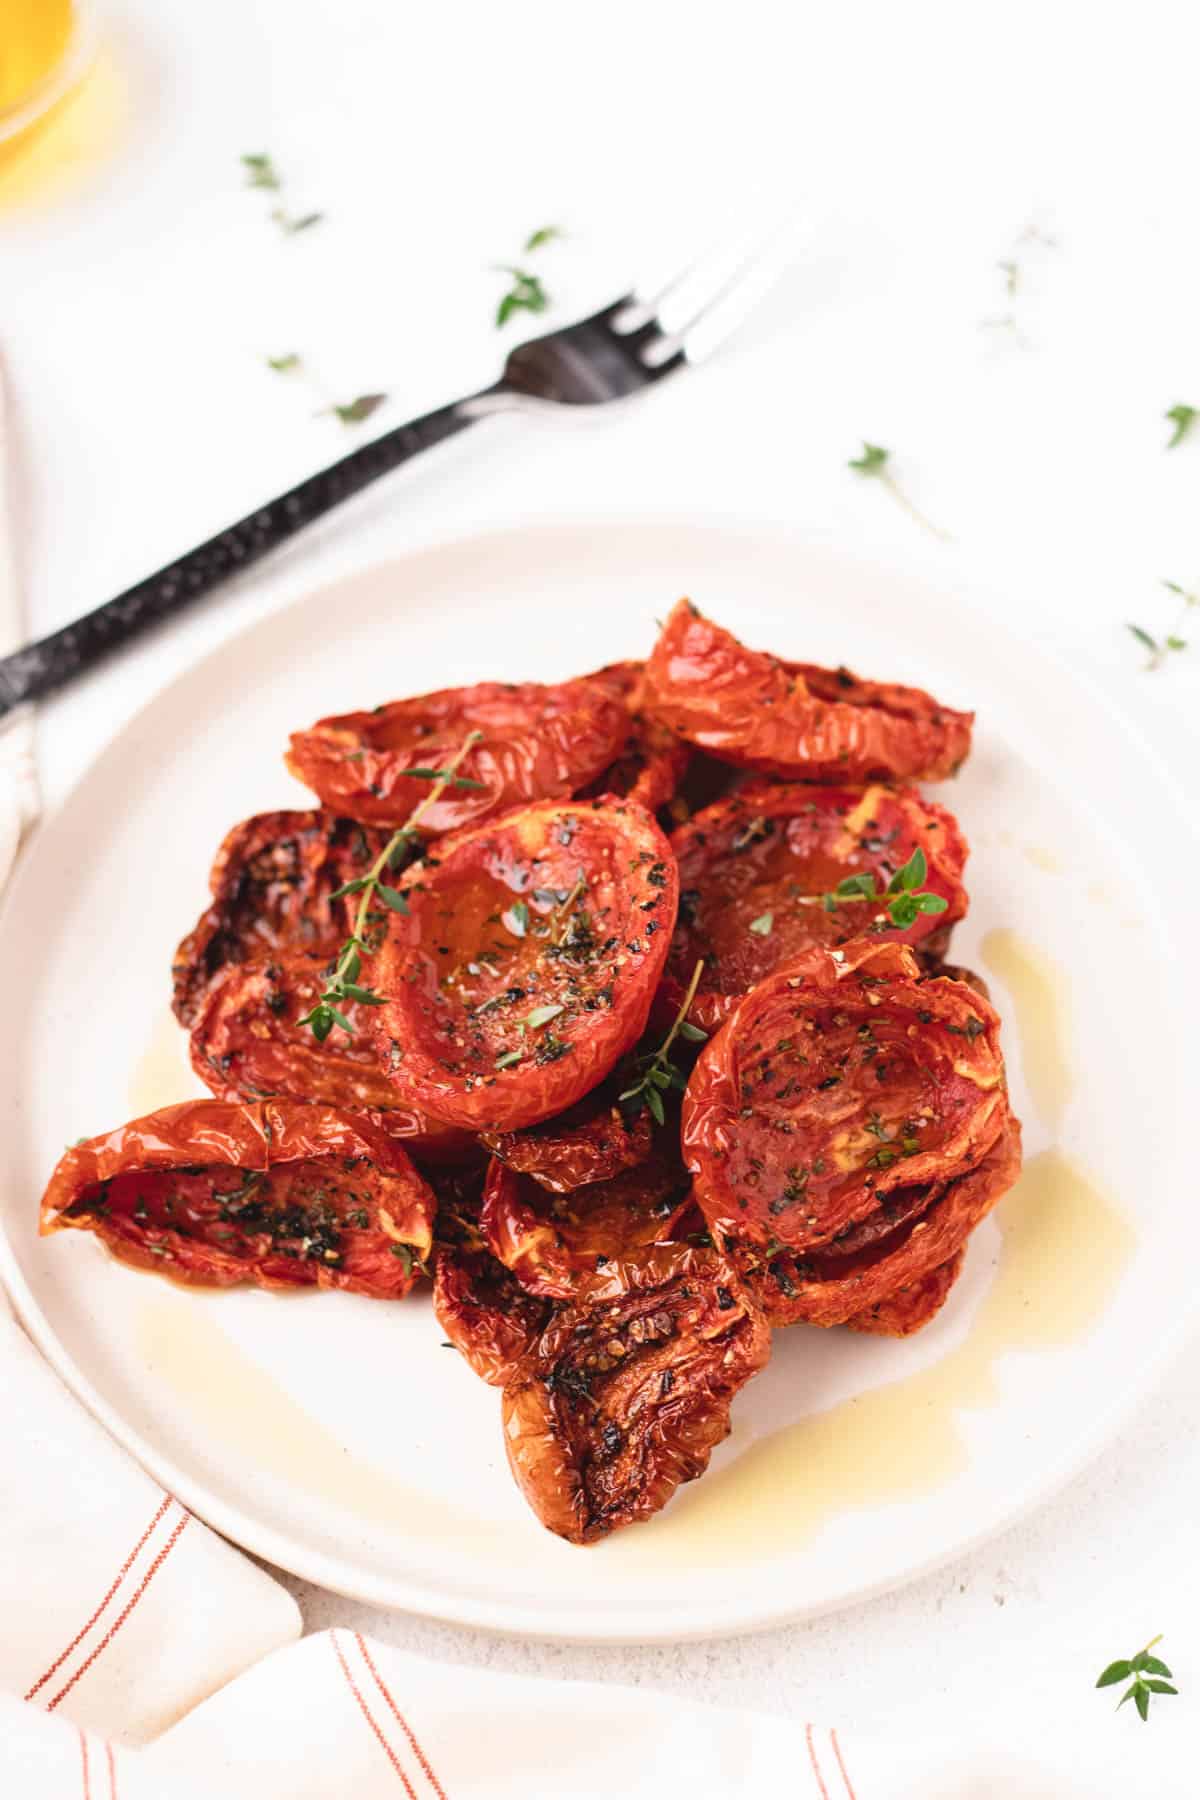 Slow roasted tomatoes piled high on a small plate.